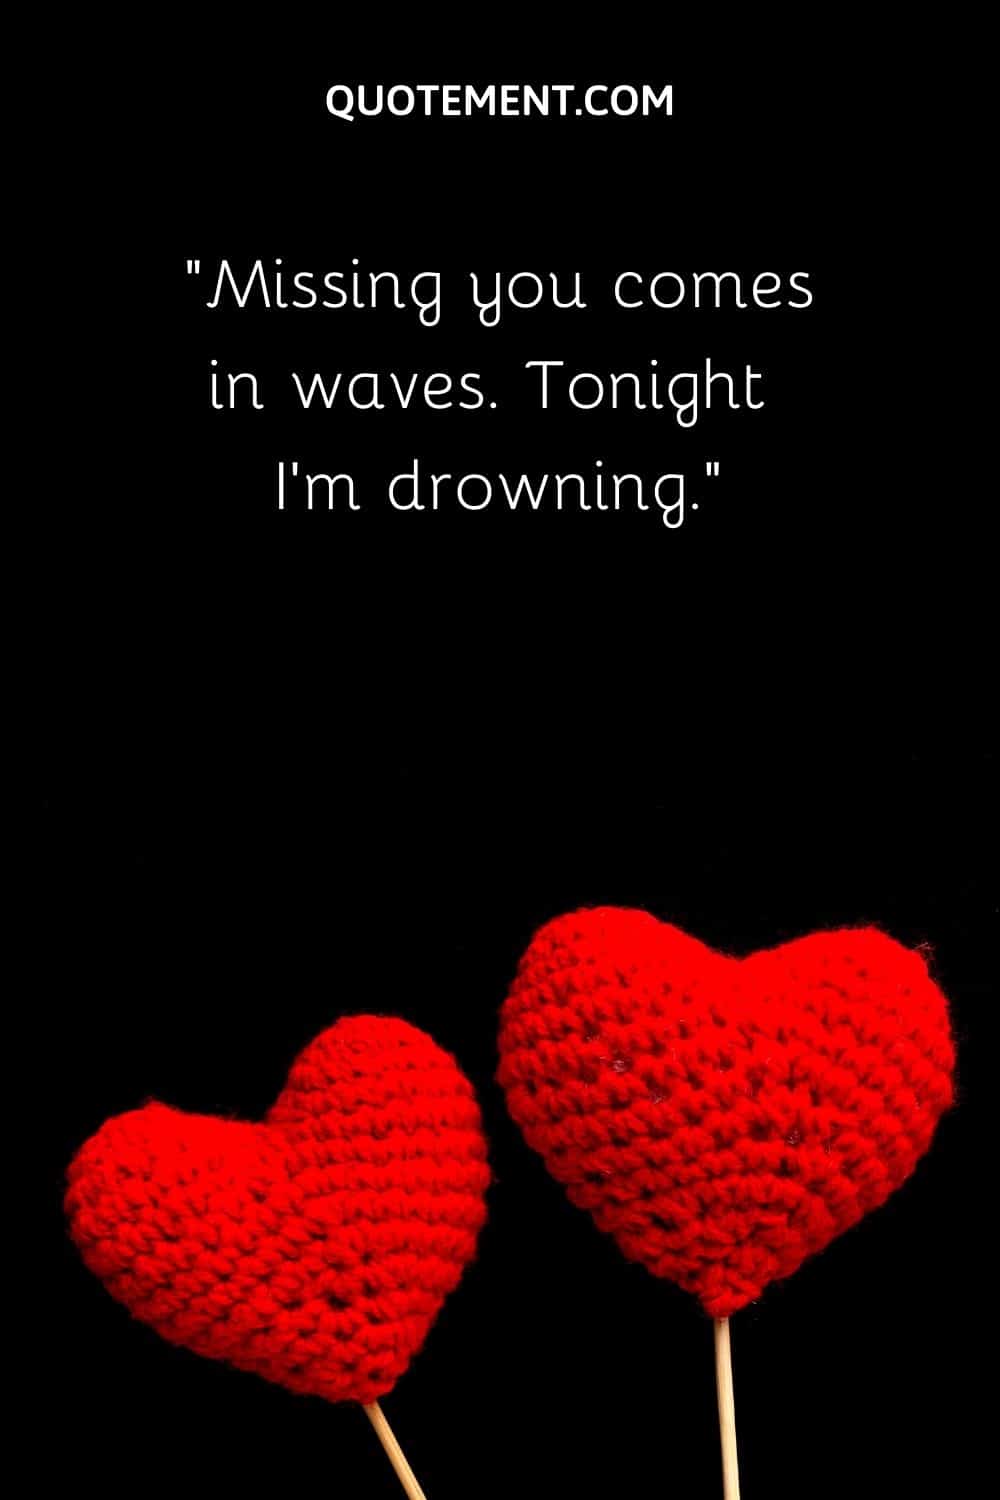 Missing you comes in waves. Tonight I'm drowning.